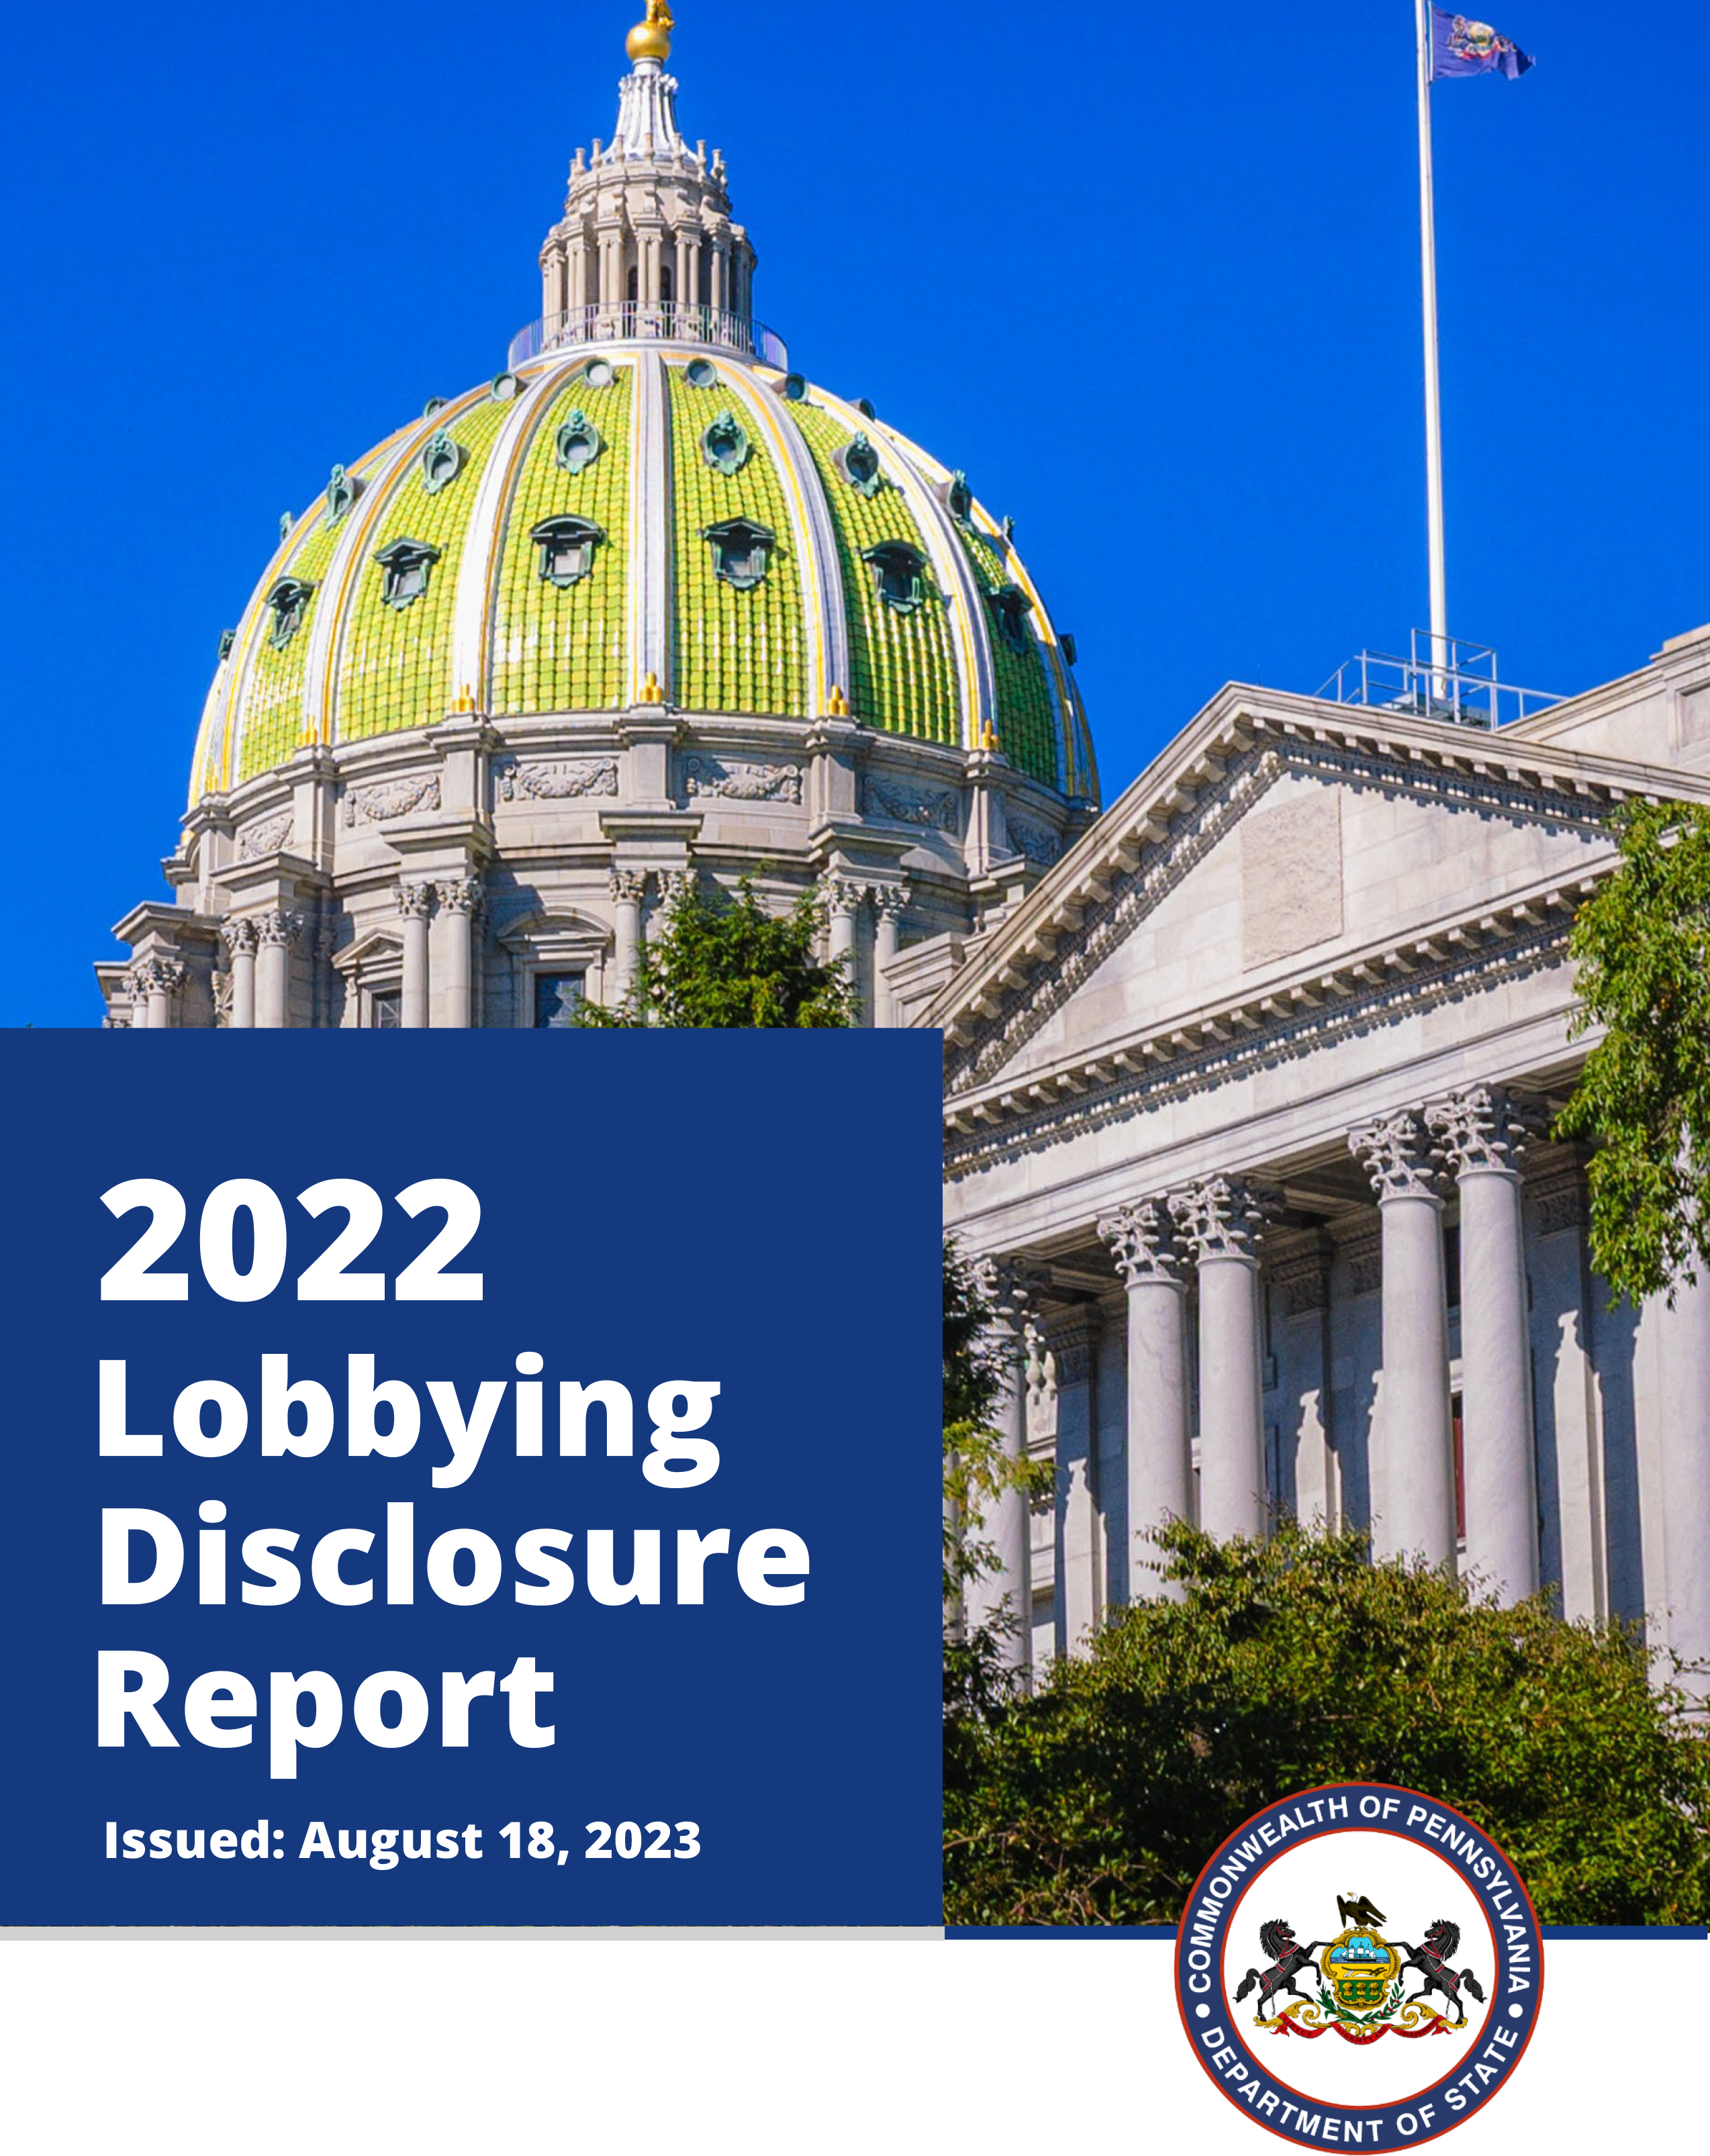 2022 Annual Report on Lobbying Disclosure in Pennsylvania Report Cover